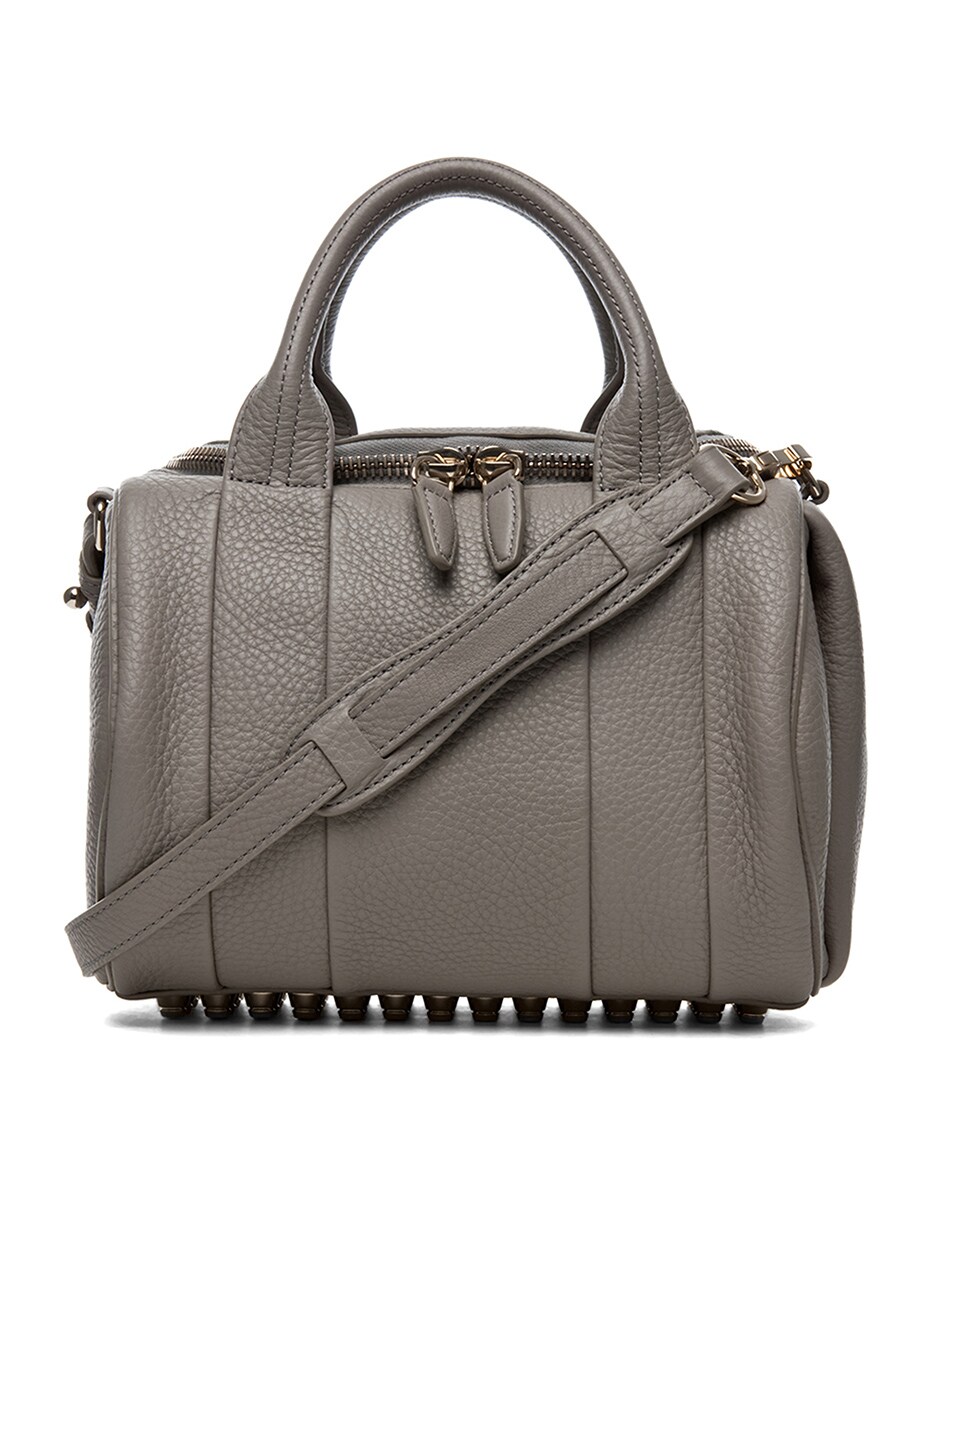 Image 1 of Alexander Wang Rockie Satchel with Silver Hardware in Oyster